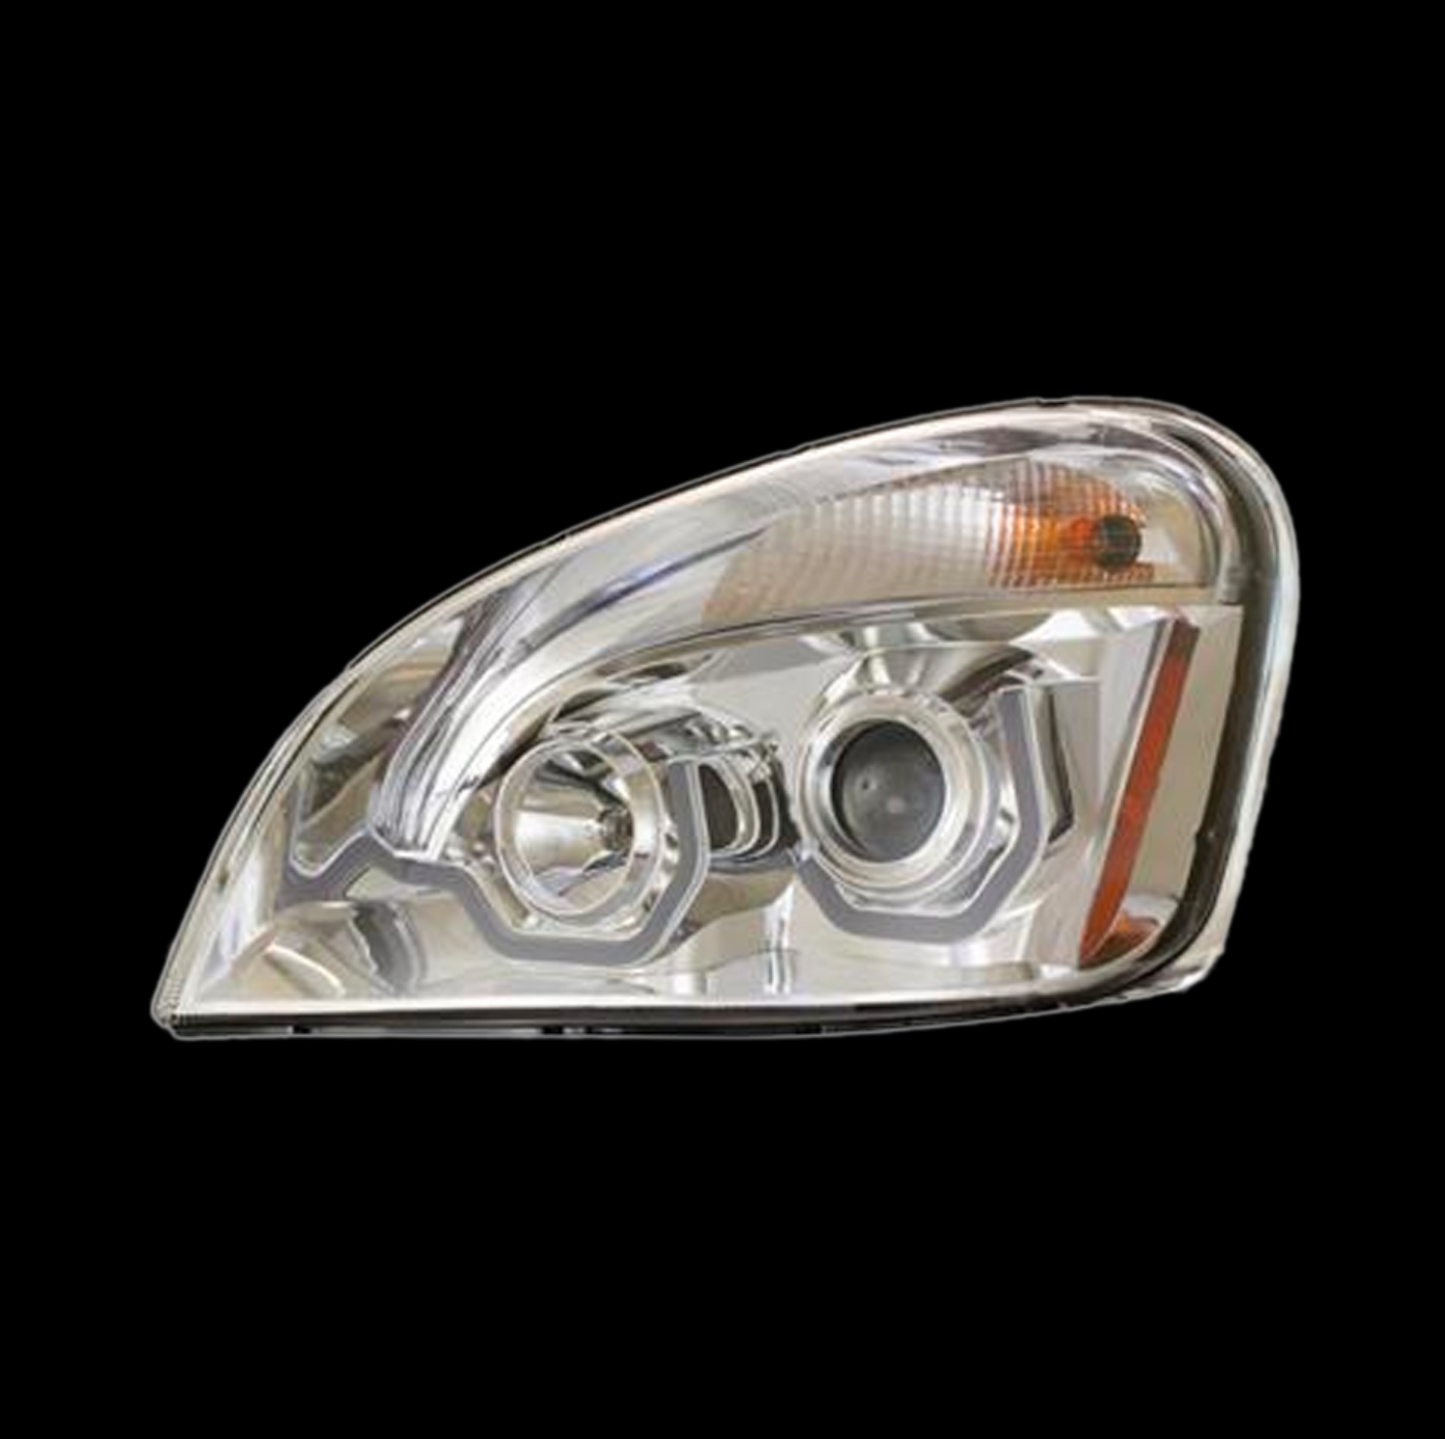 Freightliner Cascadia projection headlight with dual function amber LED light bar